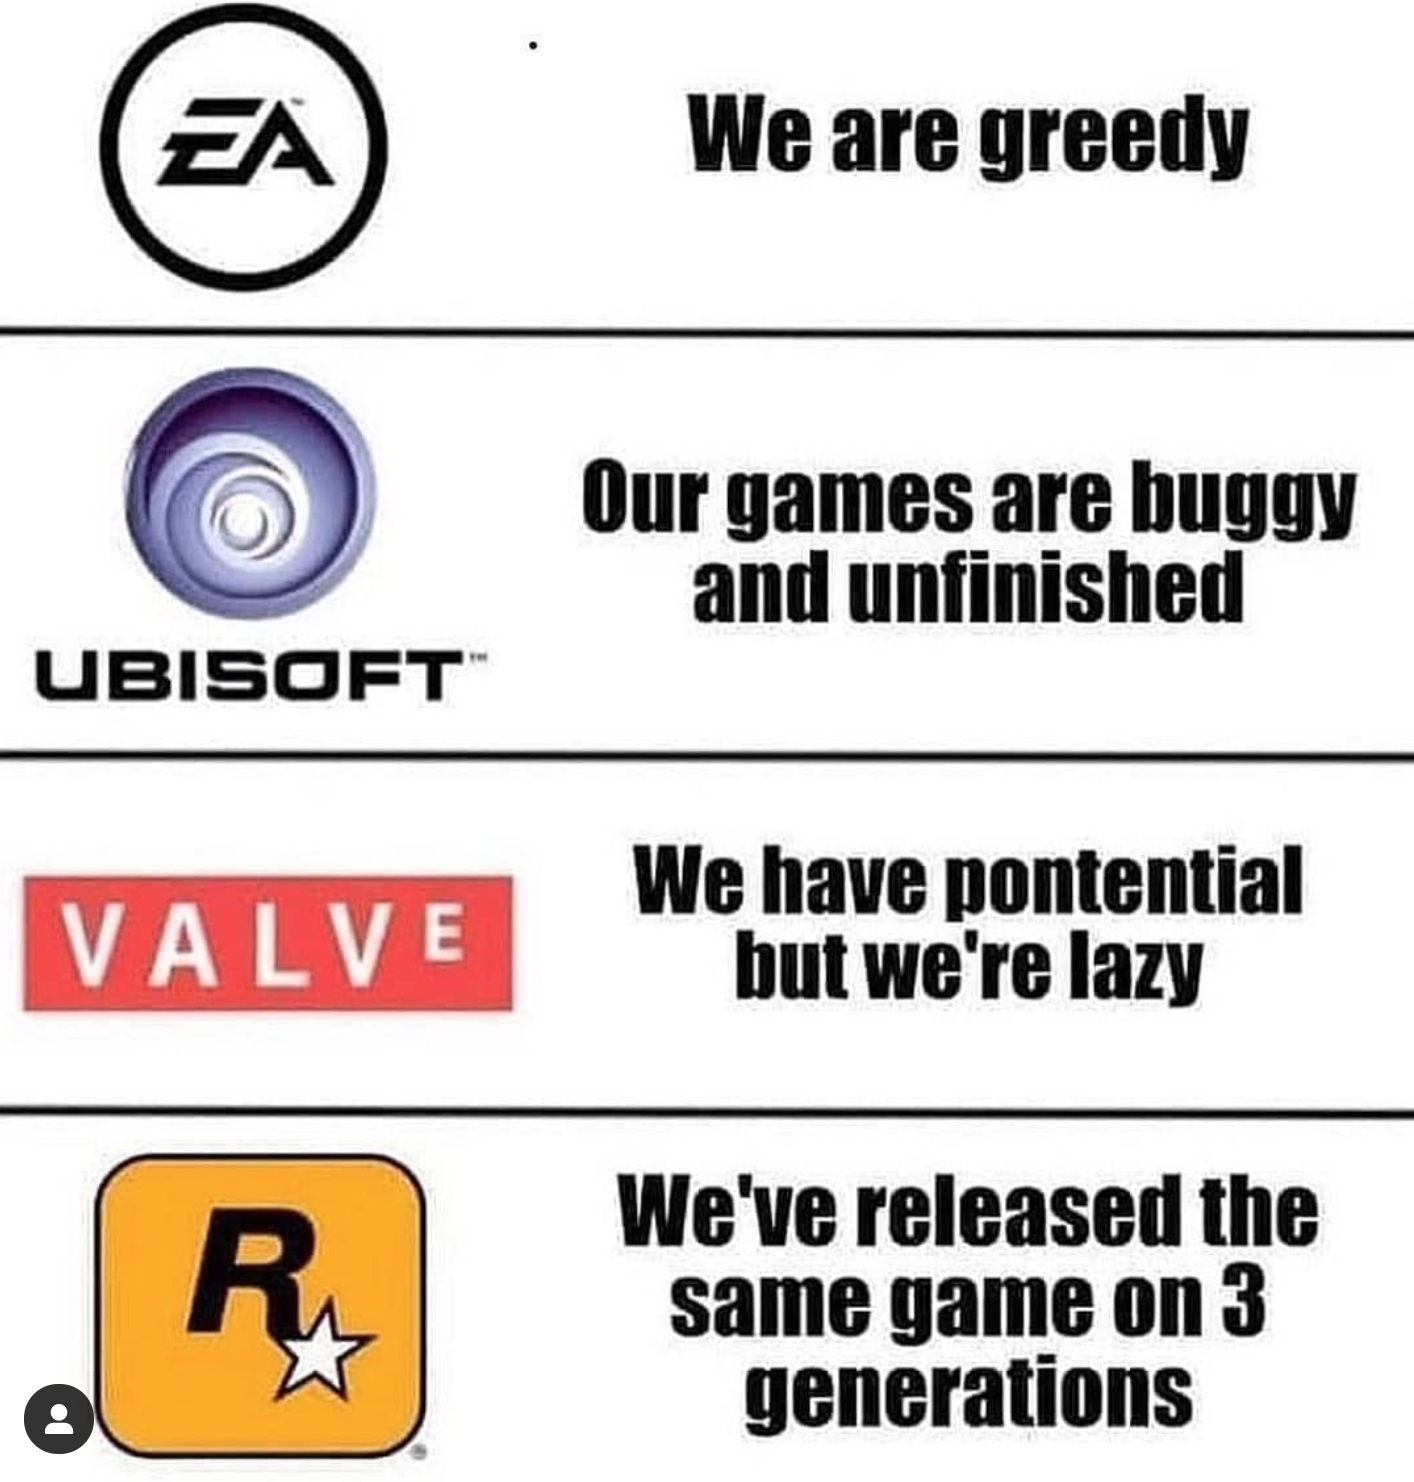 funny gaming memes - diagram - We are greedy Our games are buggy and unfinished Ubisoft Valve We have pontential but we're lazy R We've released the same game on 3 generations